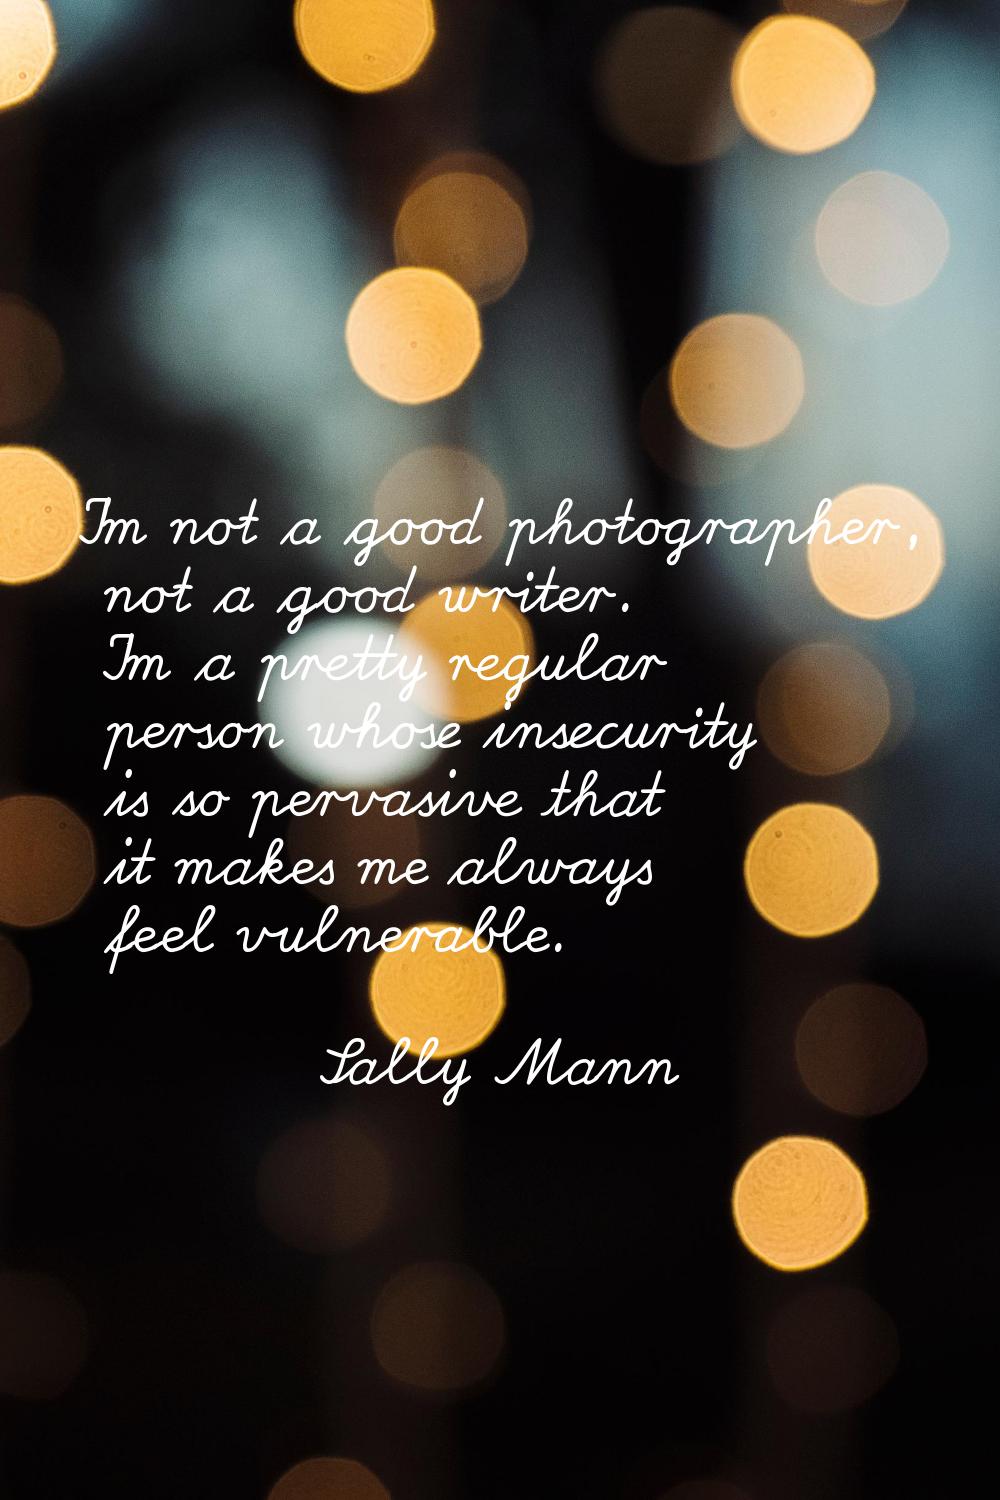 I'm not a good photographer, not a good writer. I'm a pretty regular person whose insecurity is so 